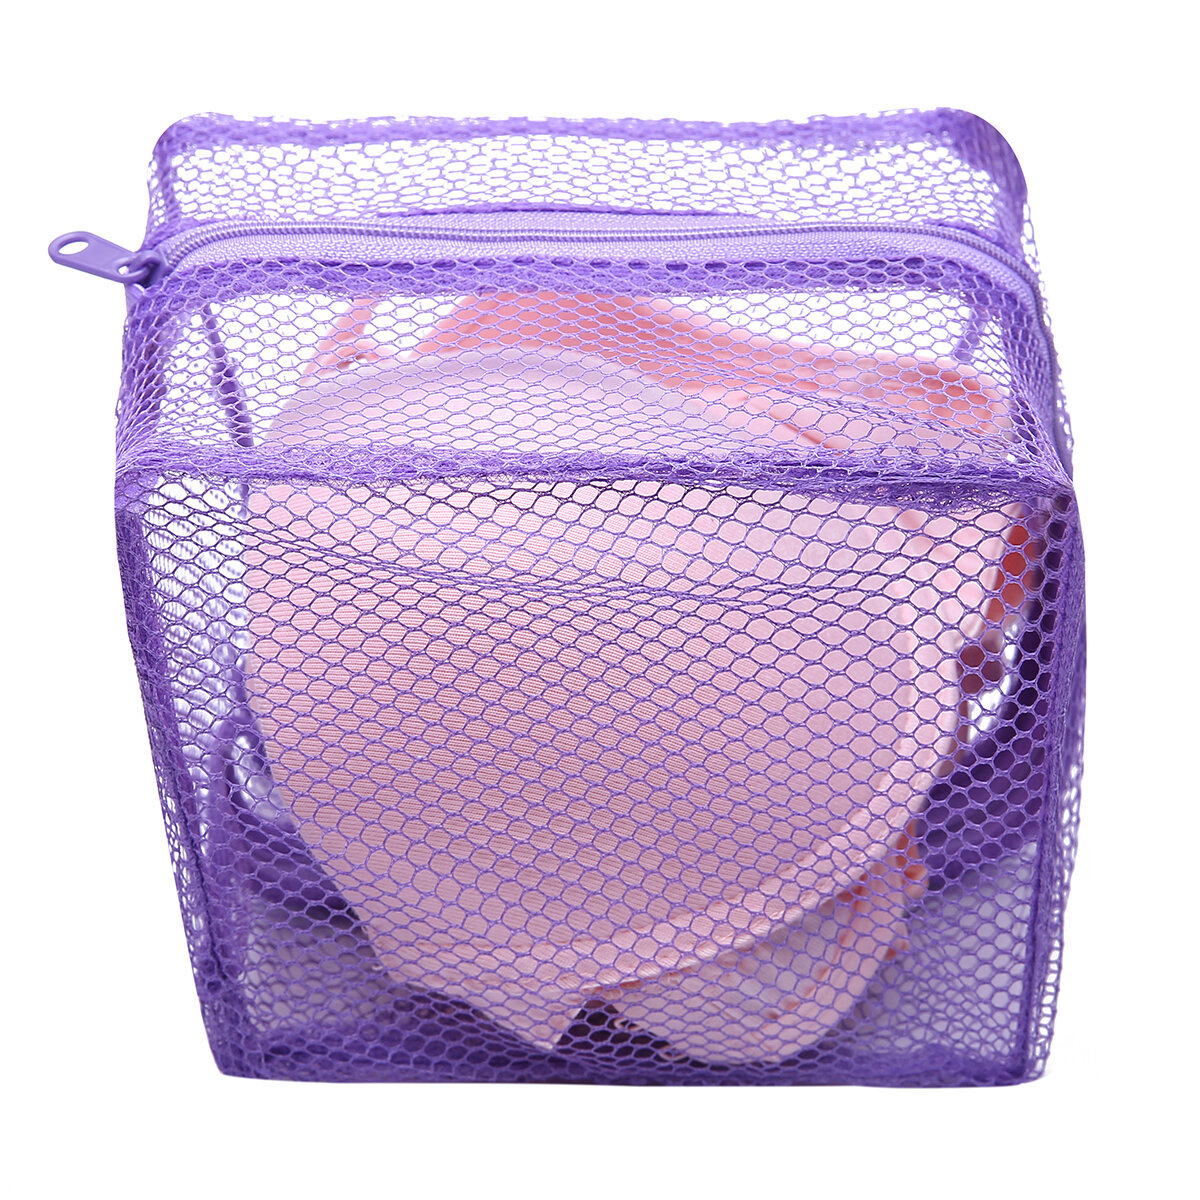 Mesh Laundry Bag Washing Clothes Zipper Solid Net For Bras And Lingerie от Newchic WW